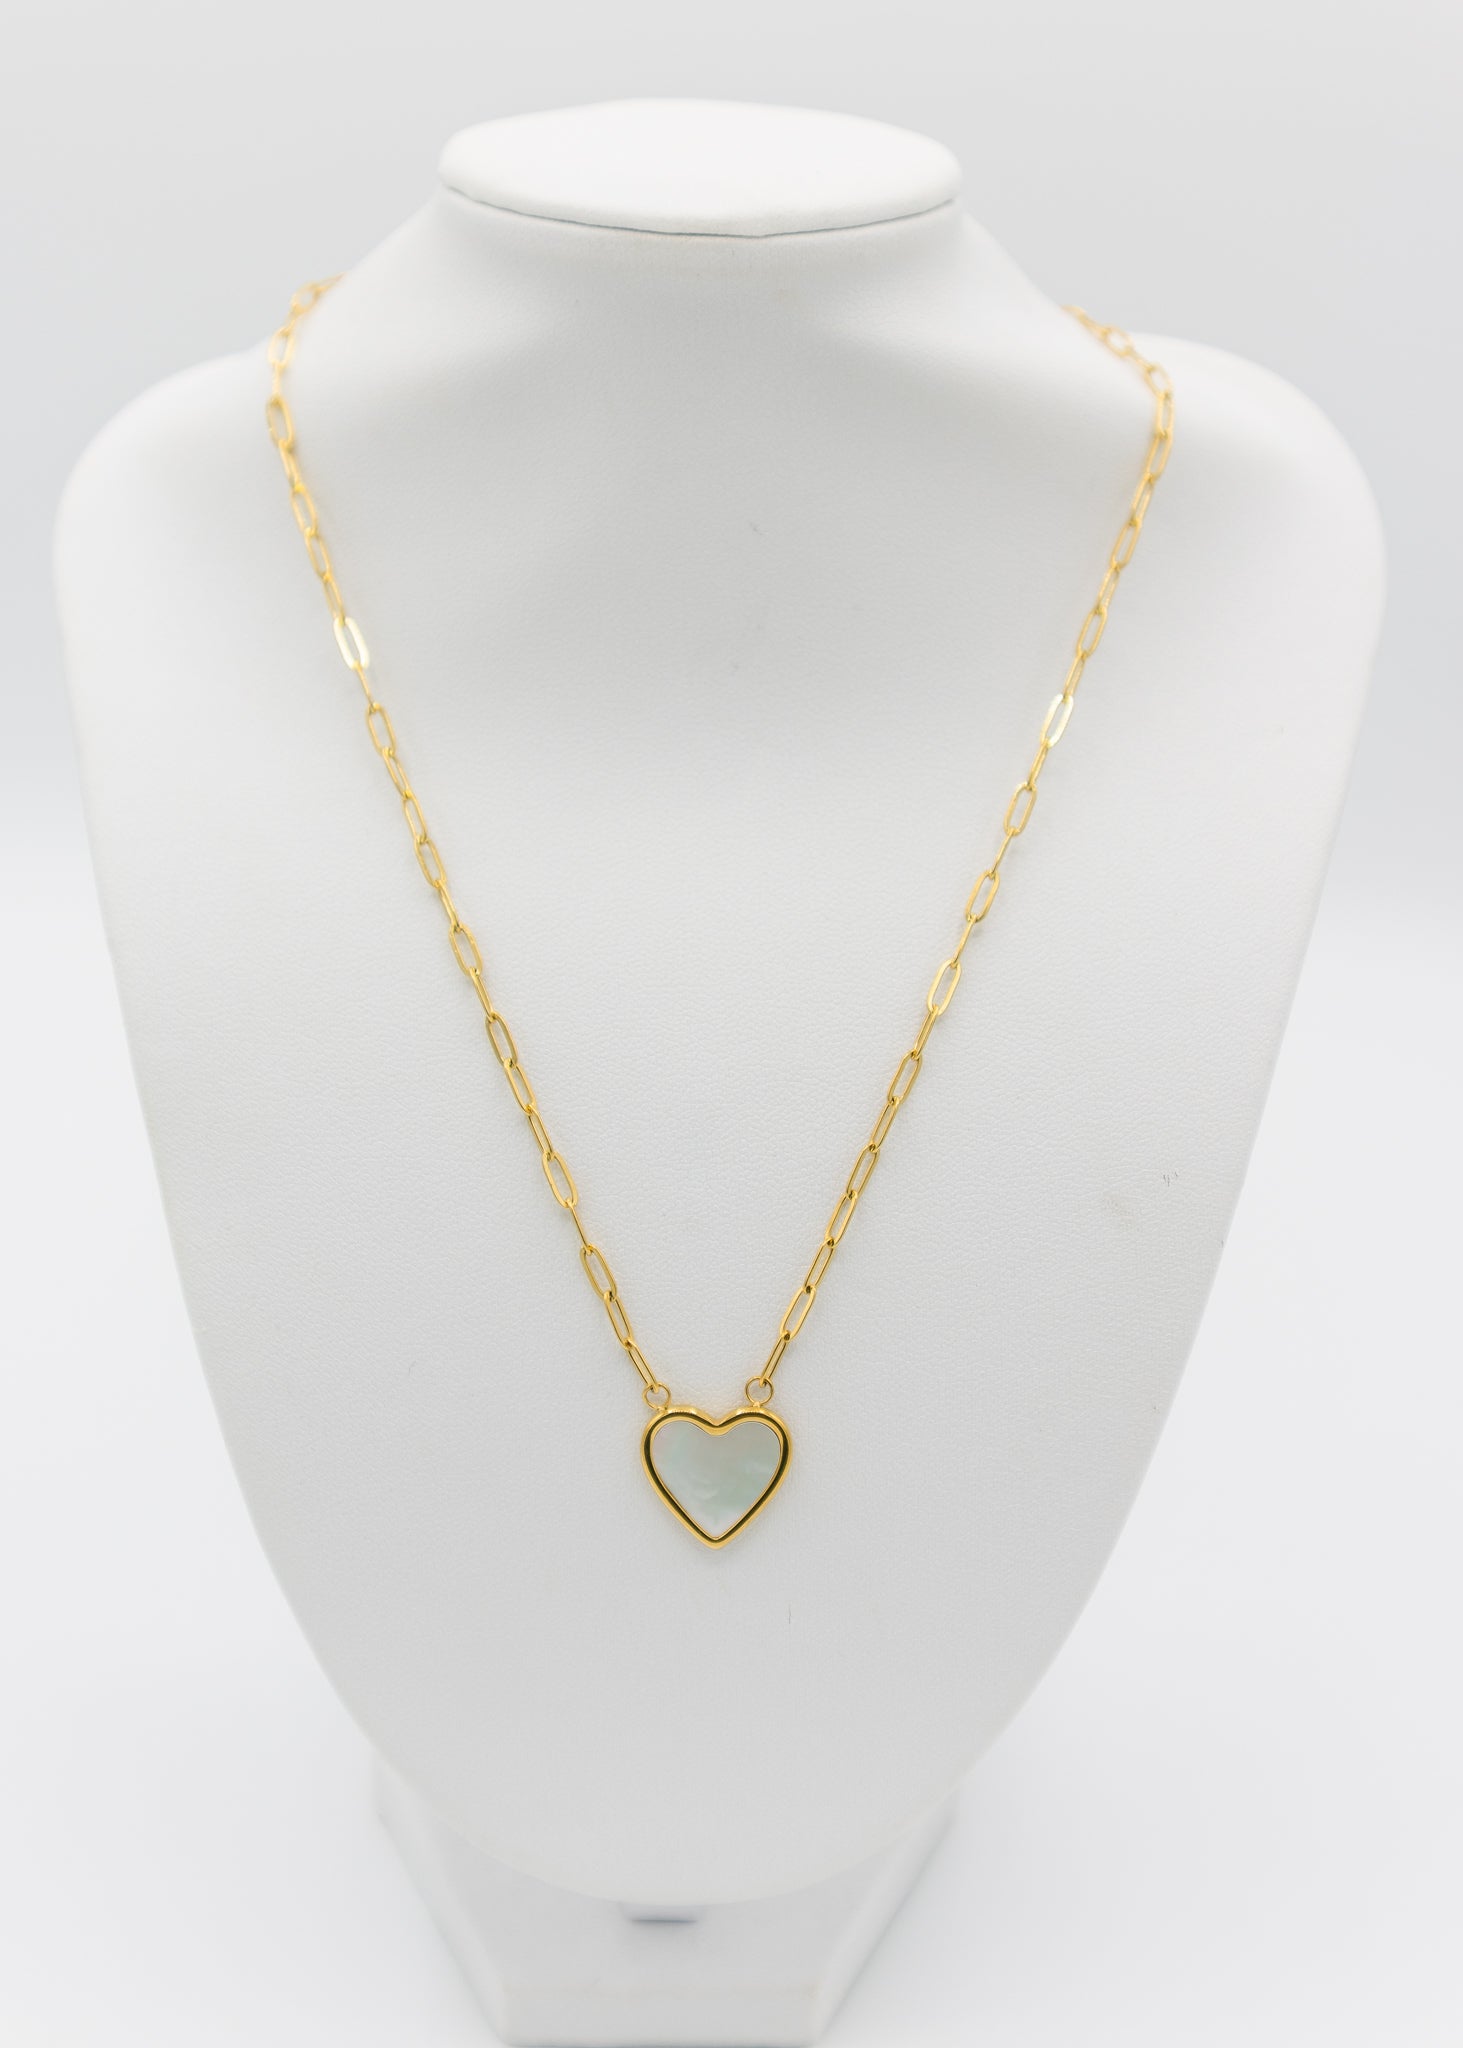 The White Heart Gold Necklace